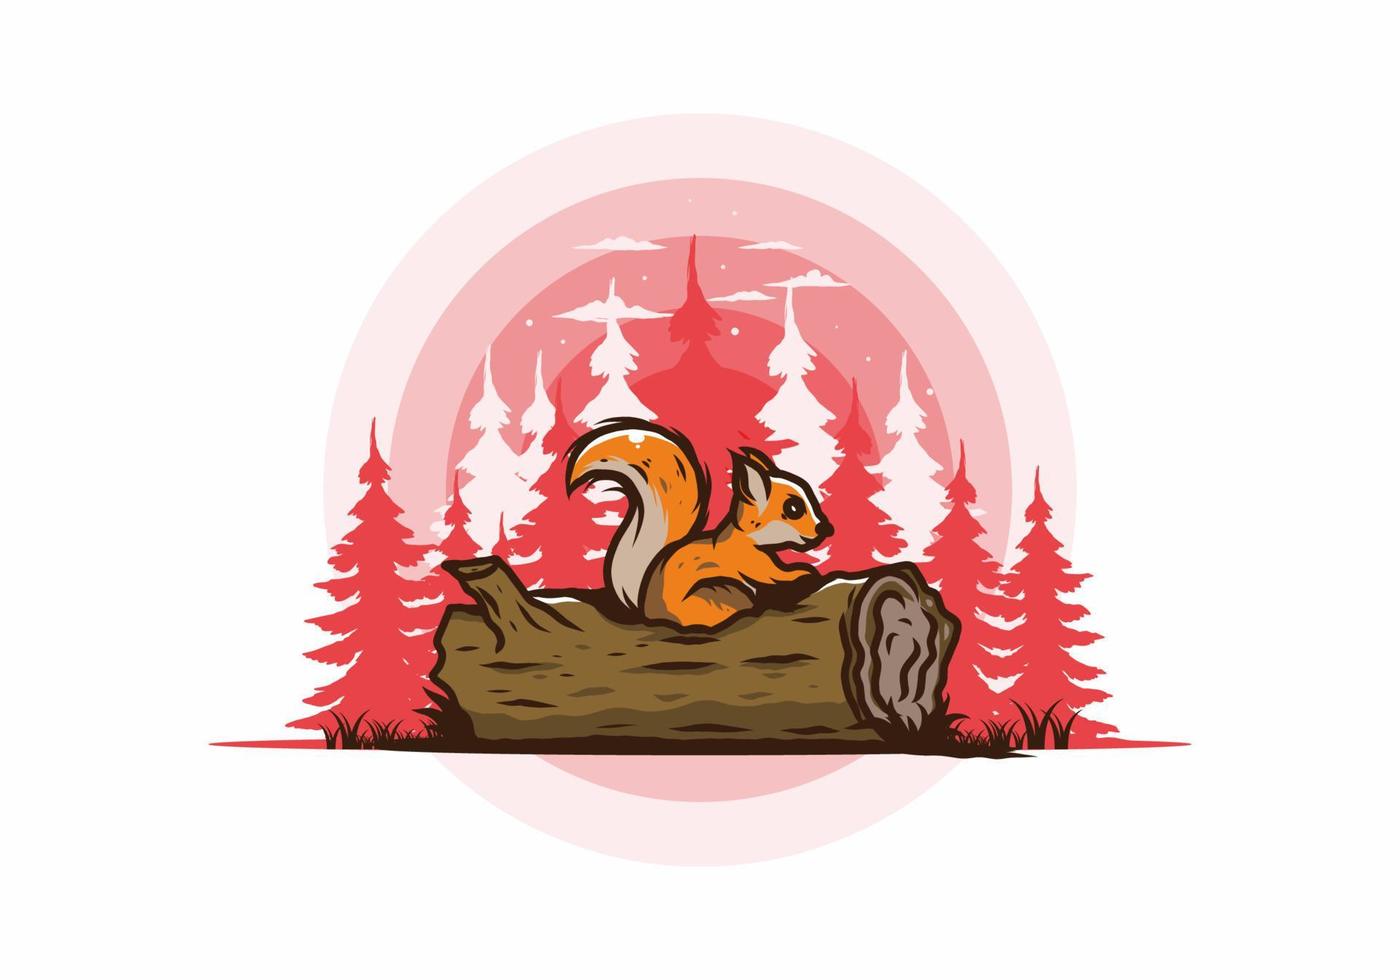 Lonely squirrel hiding in a dead tree trunk illustration vector